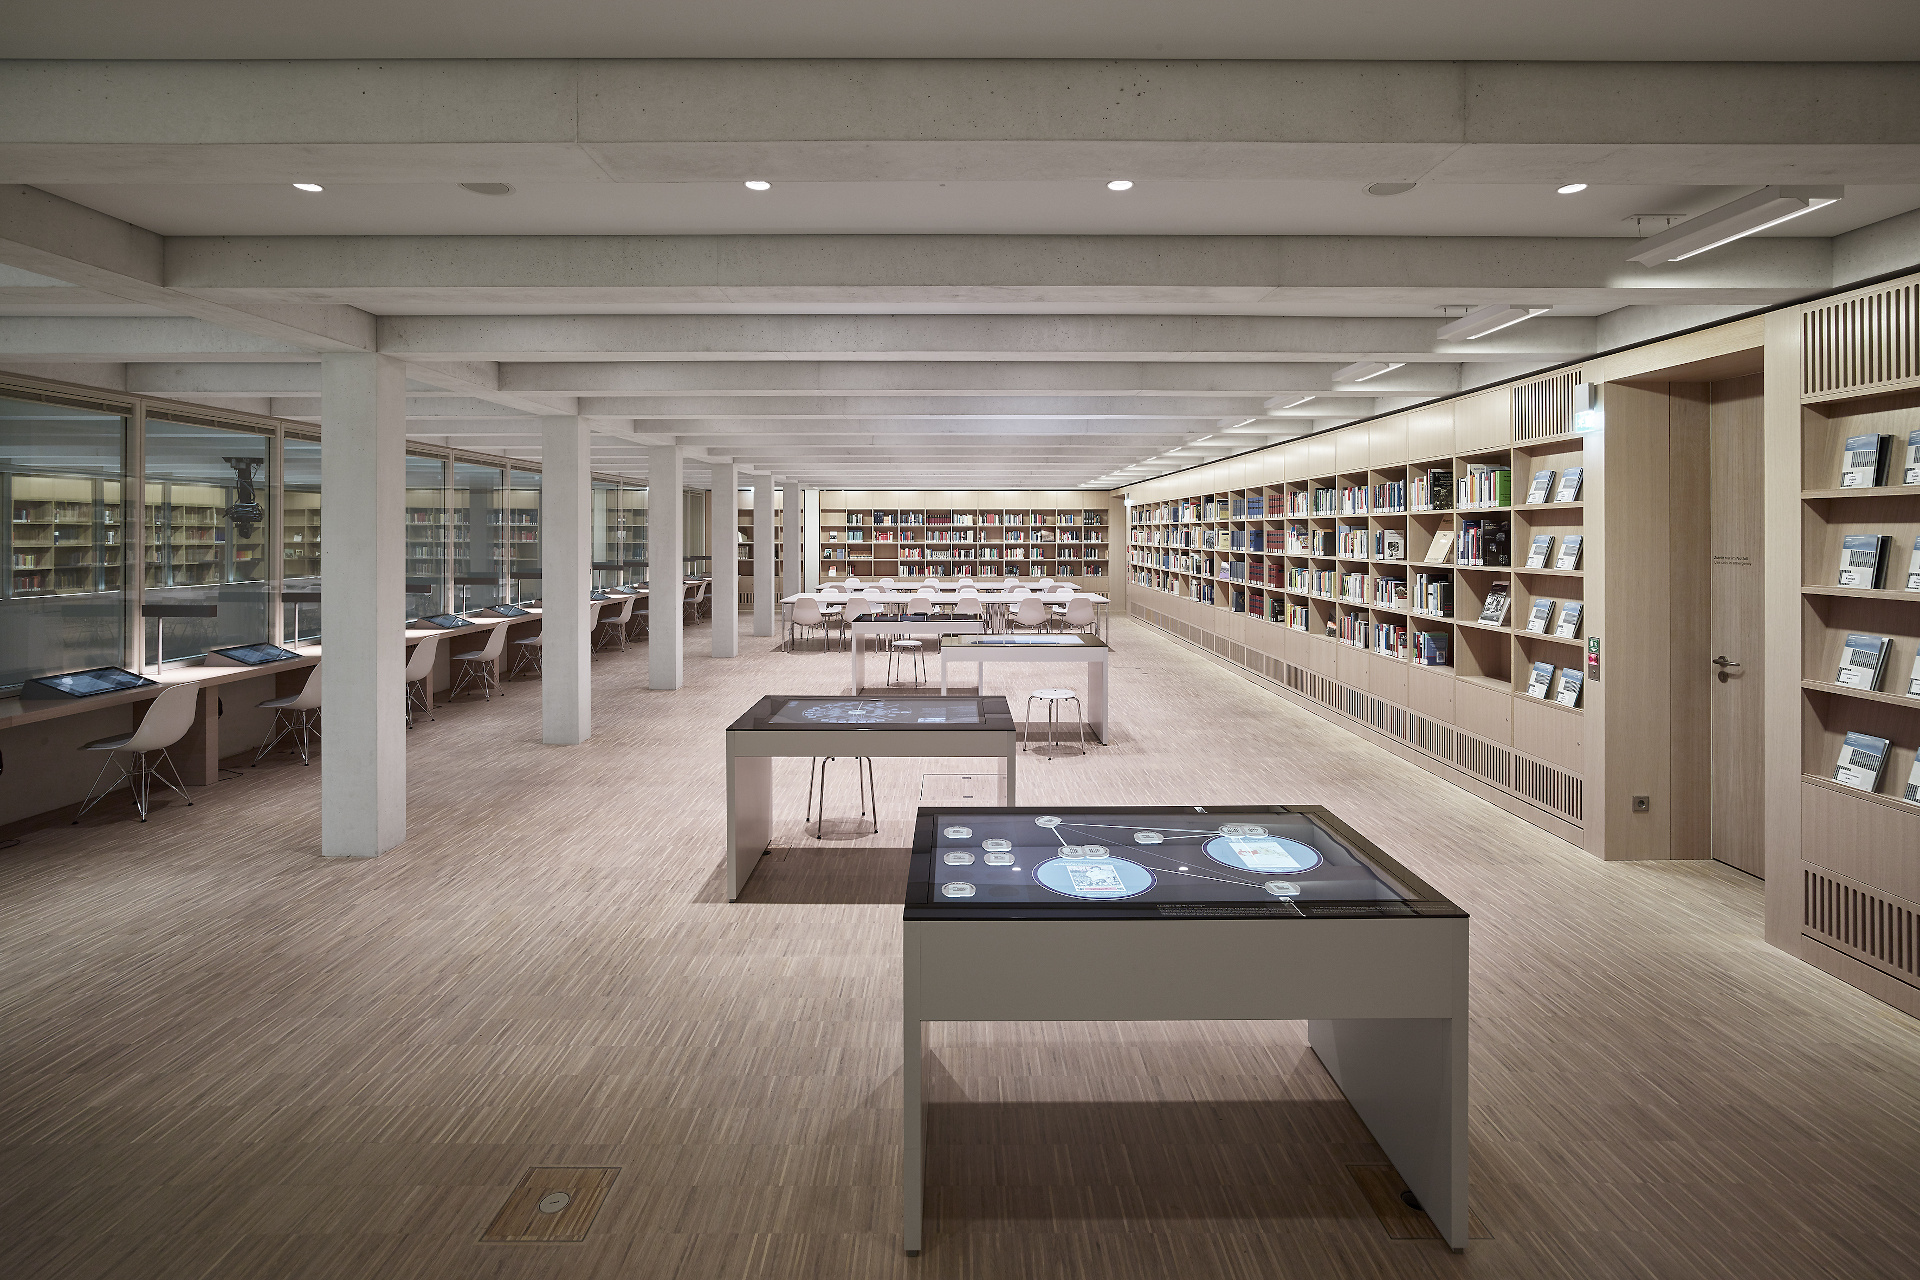 In the foreground are four media tables. On the right are touch screen terminals and on the left the bookshelves in the reference library. 